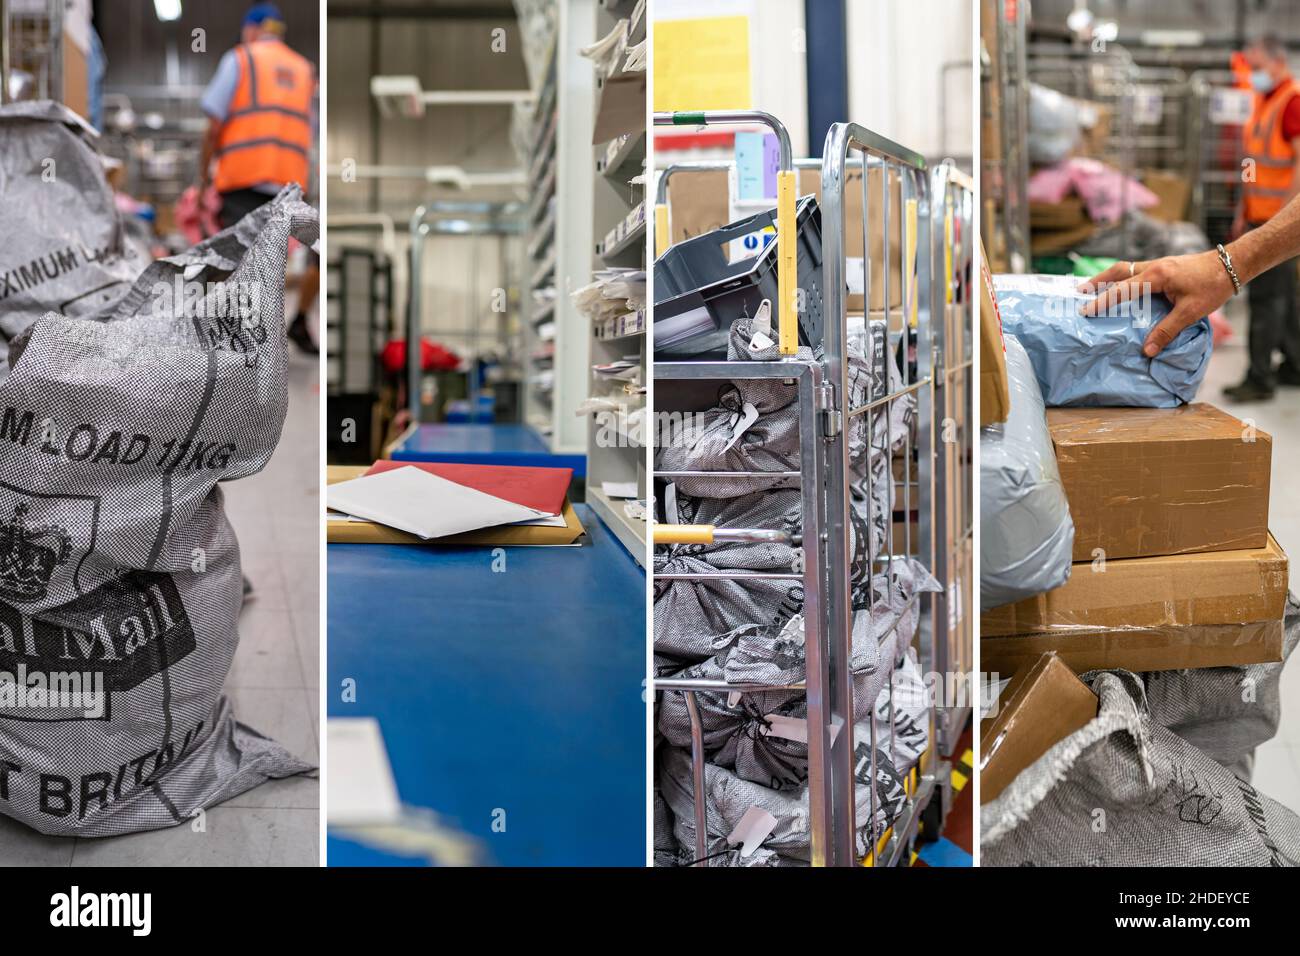 Royal Mail collage. British postal service and courier company. Mail delivery sorting centre inside. Swansea, UK - January 5, 2022. Stock Photo